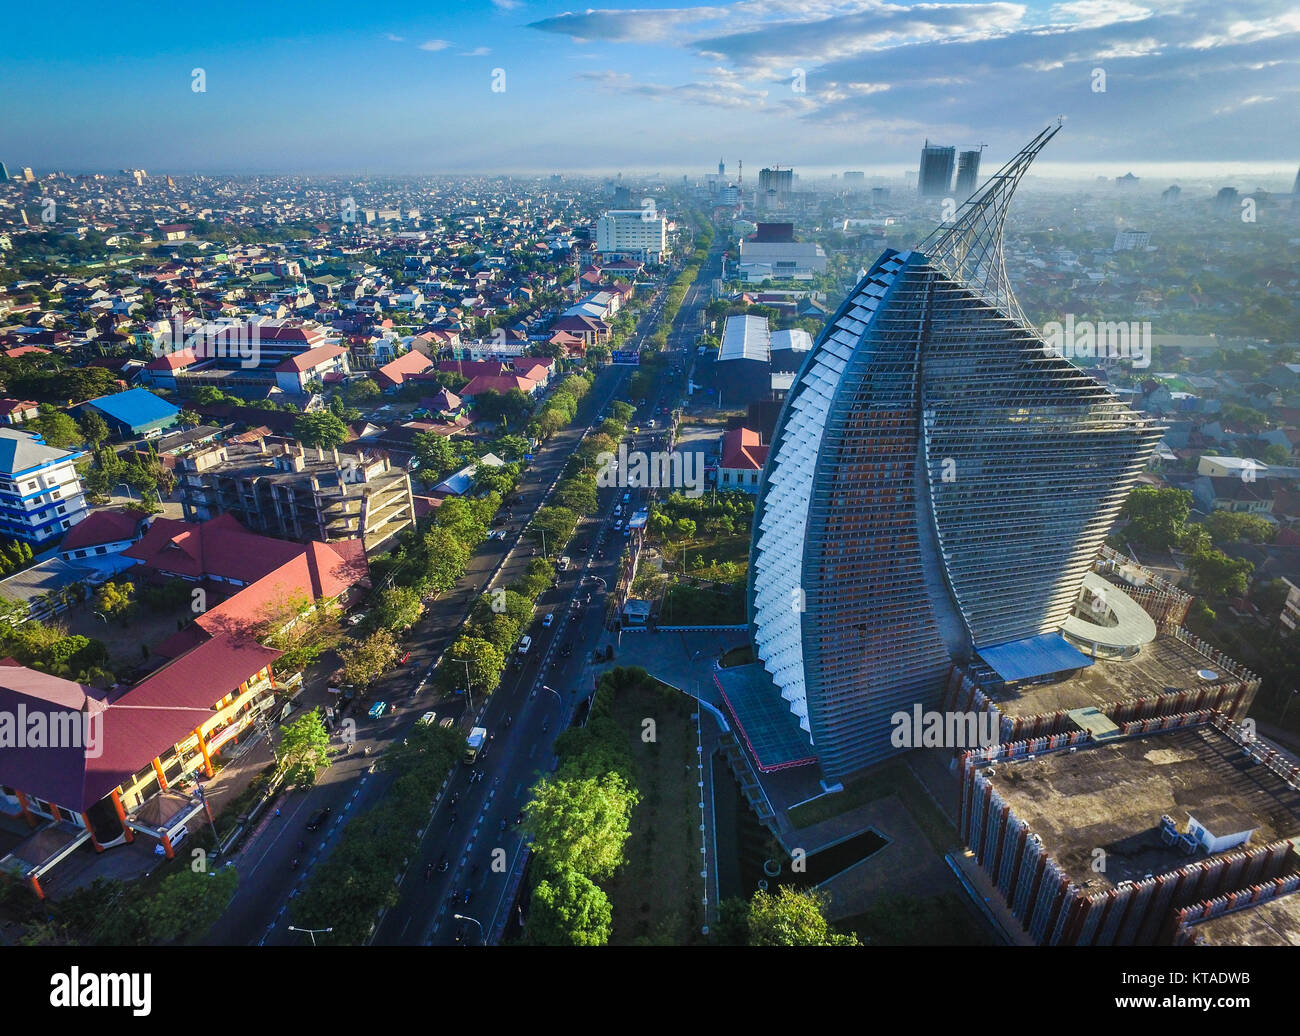 Makassar House High Resolution Stock Photography and Images - Alamy